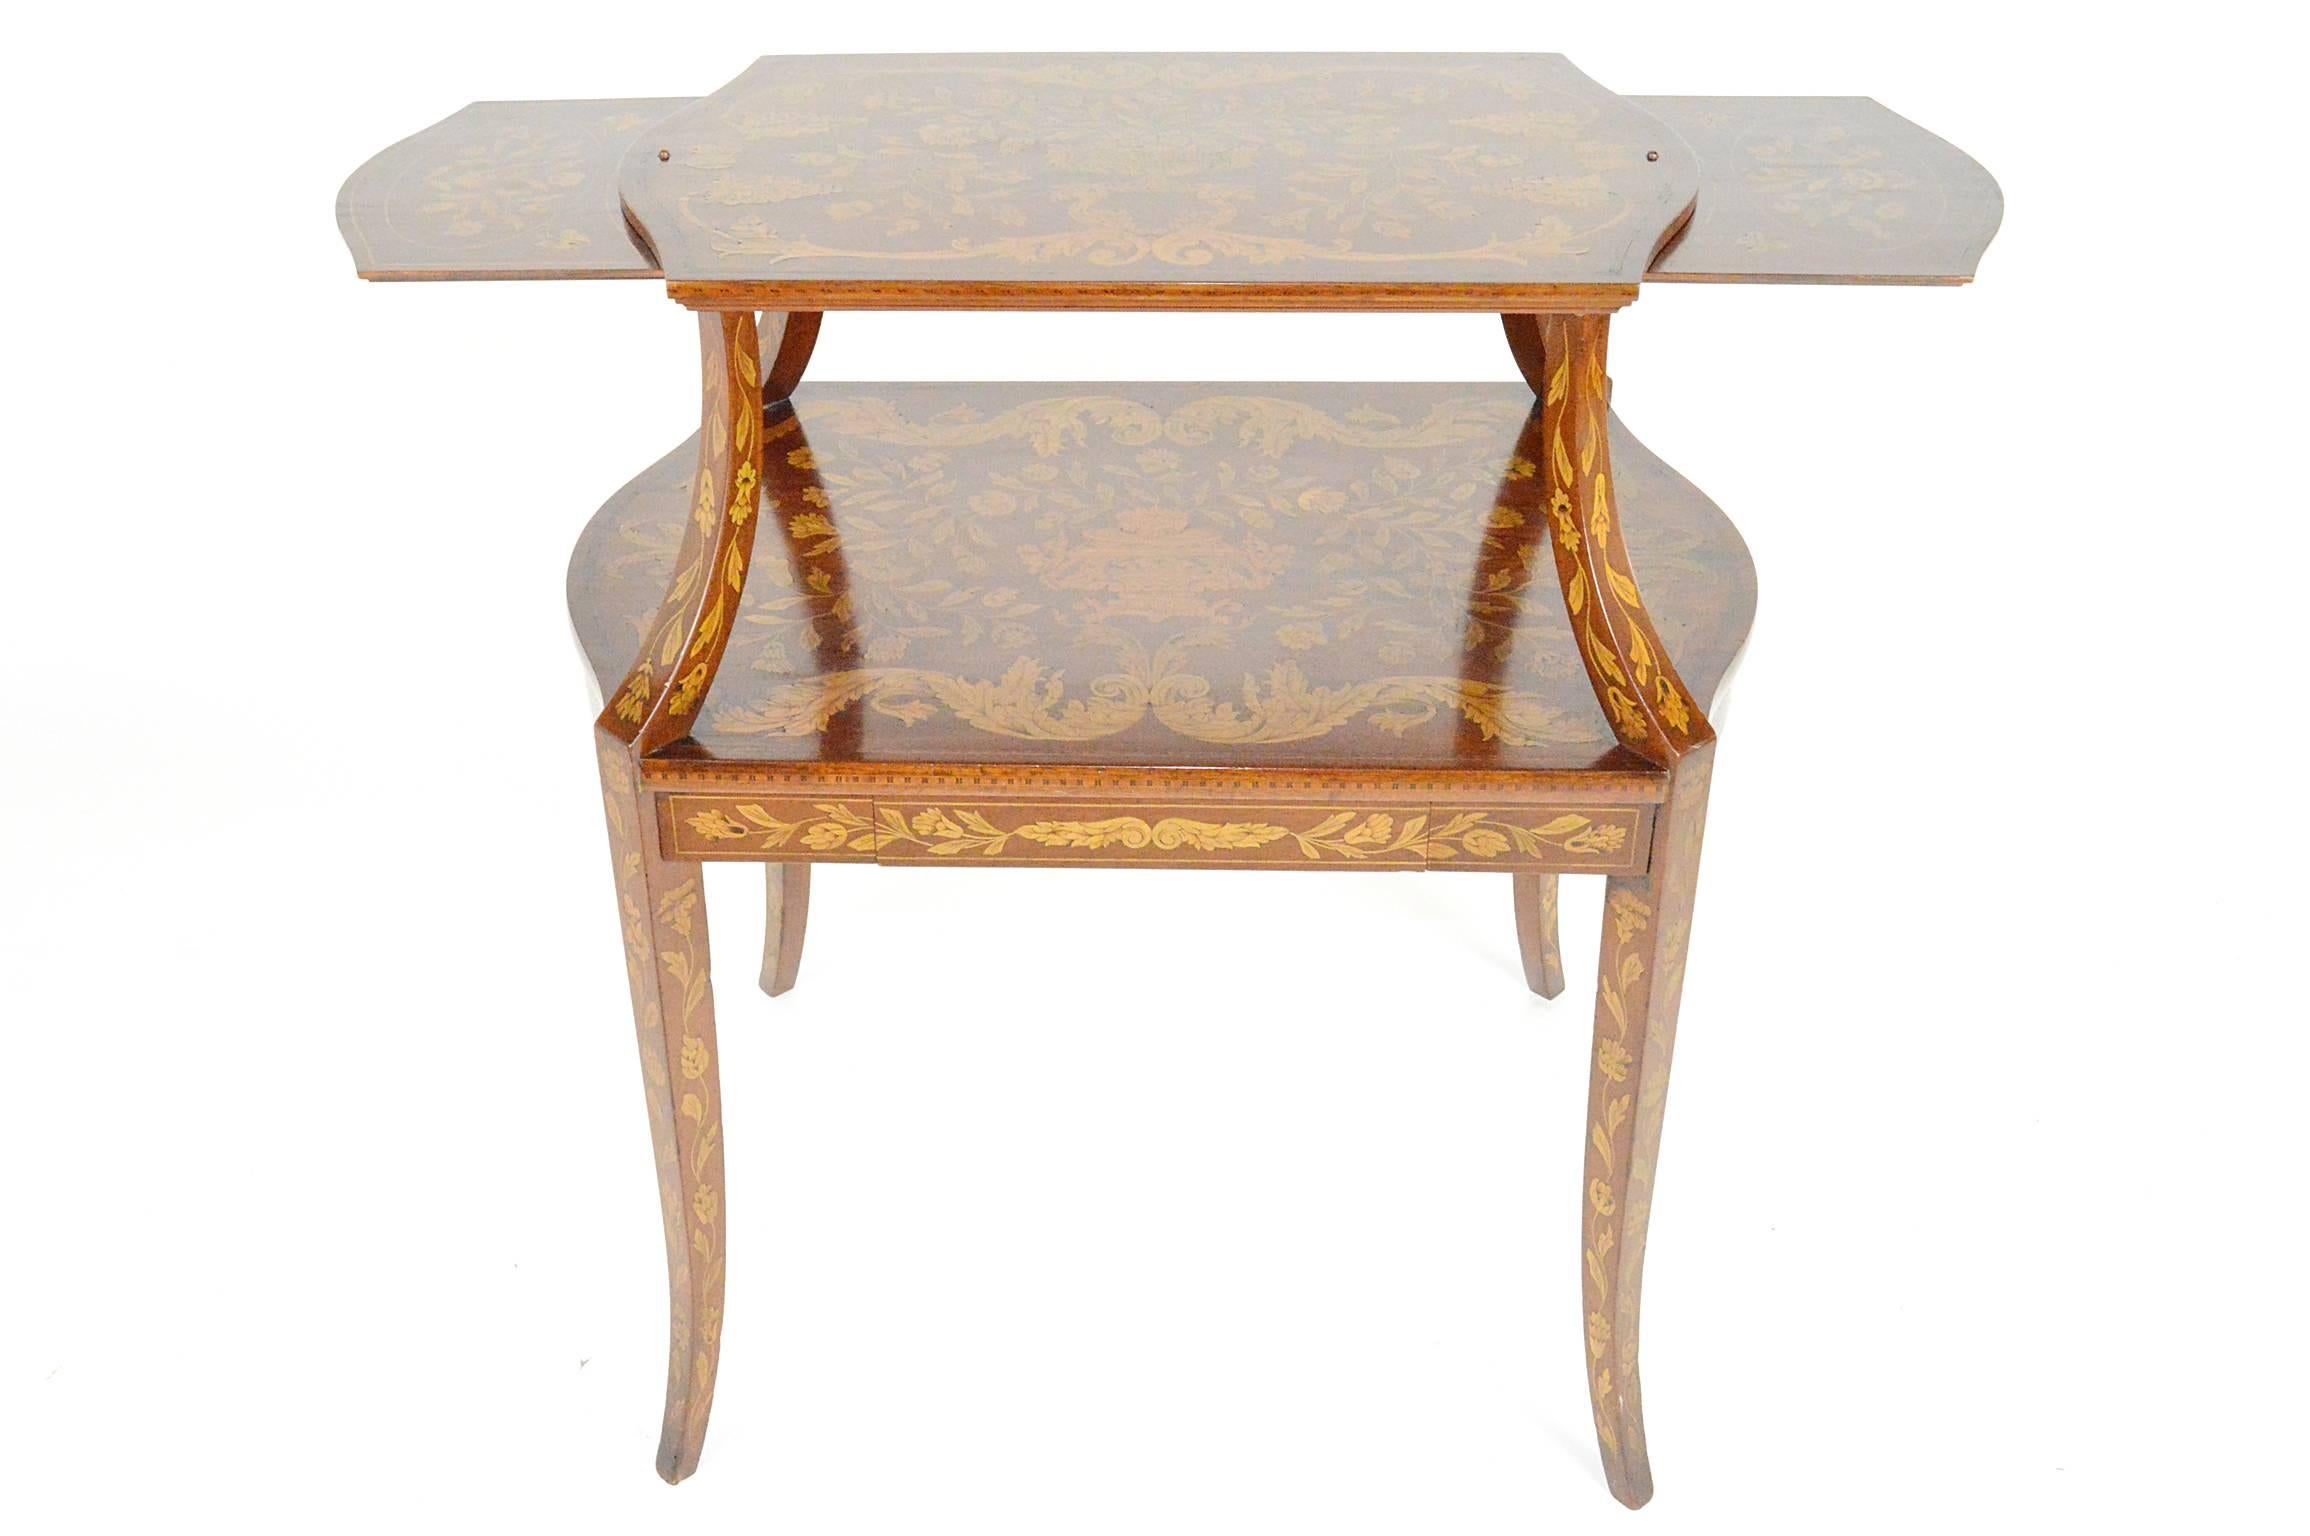 20th Century Dutch Marquetry Style Two-Tiered Tea Table For Sale